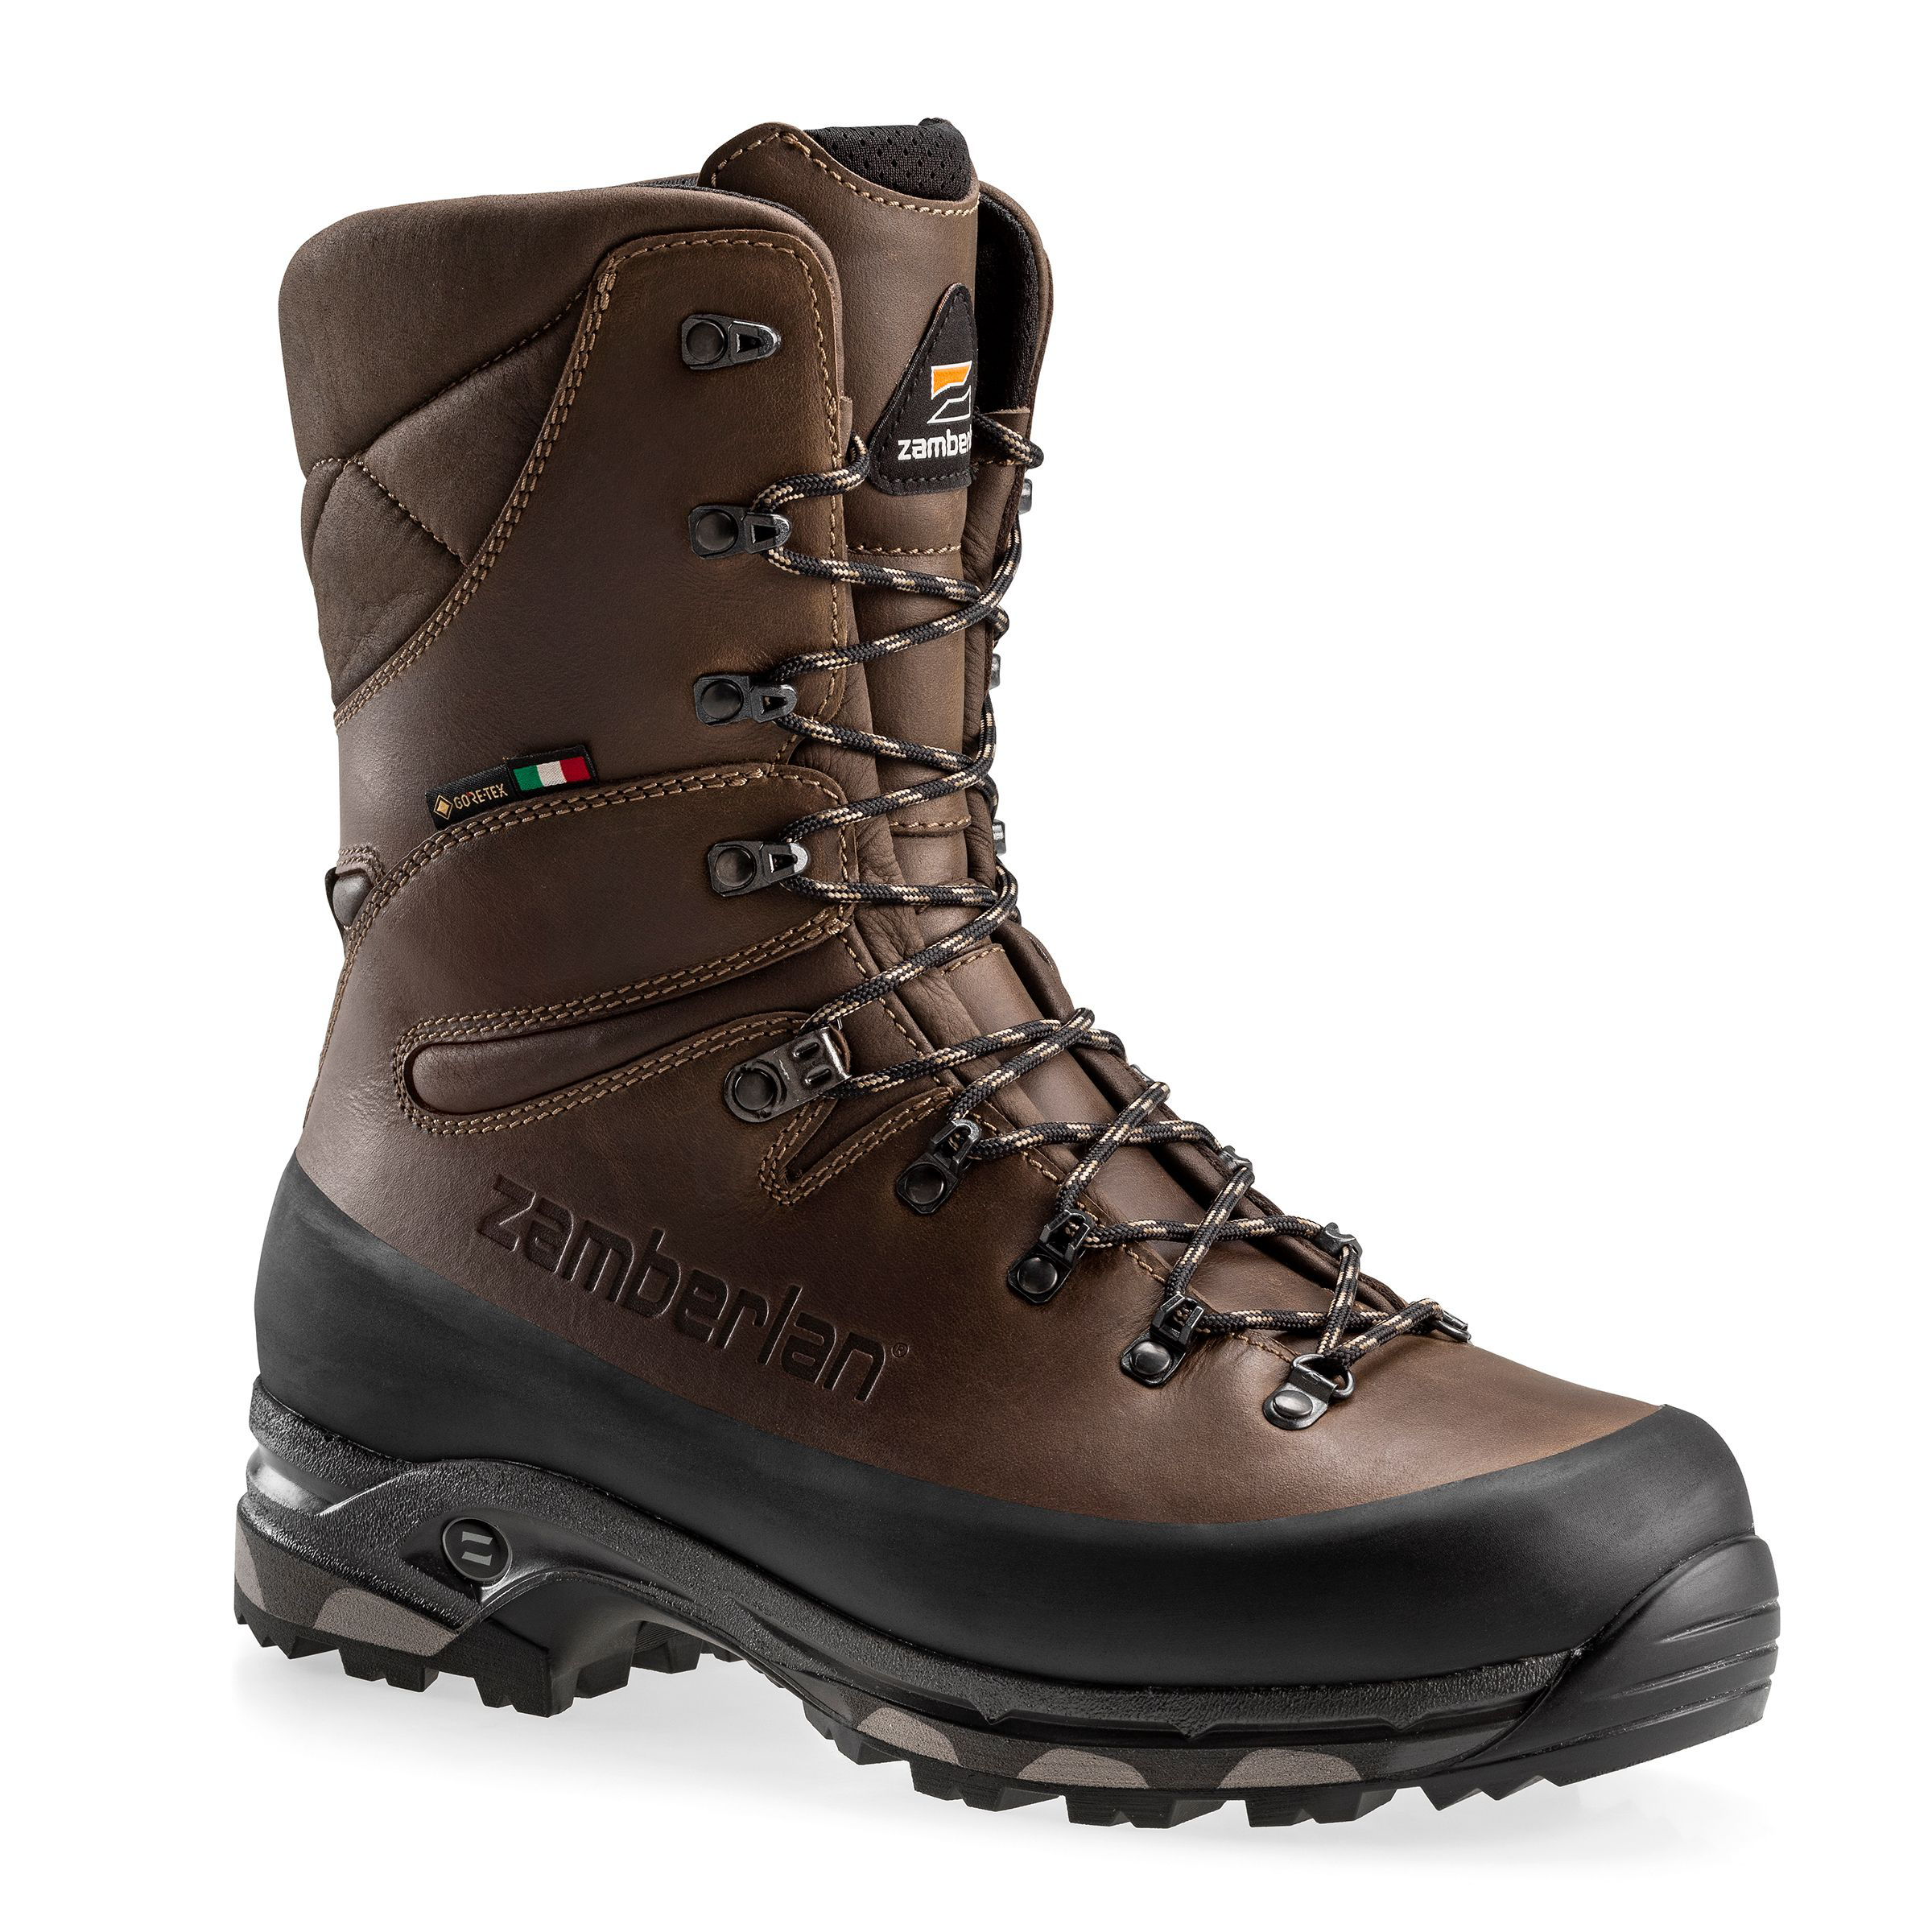 Zamberlan 1005 Hunter Pro GTX RR WL GORE-TEX Insulated Hunting Boots for Men - Brown - 12W